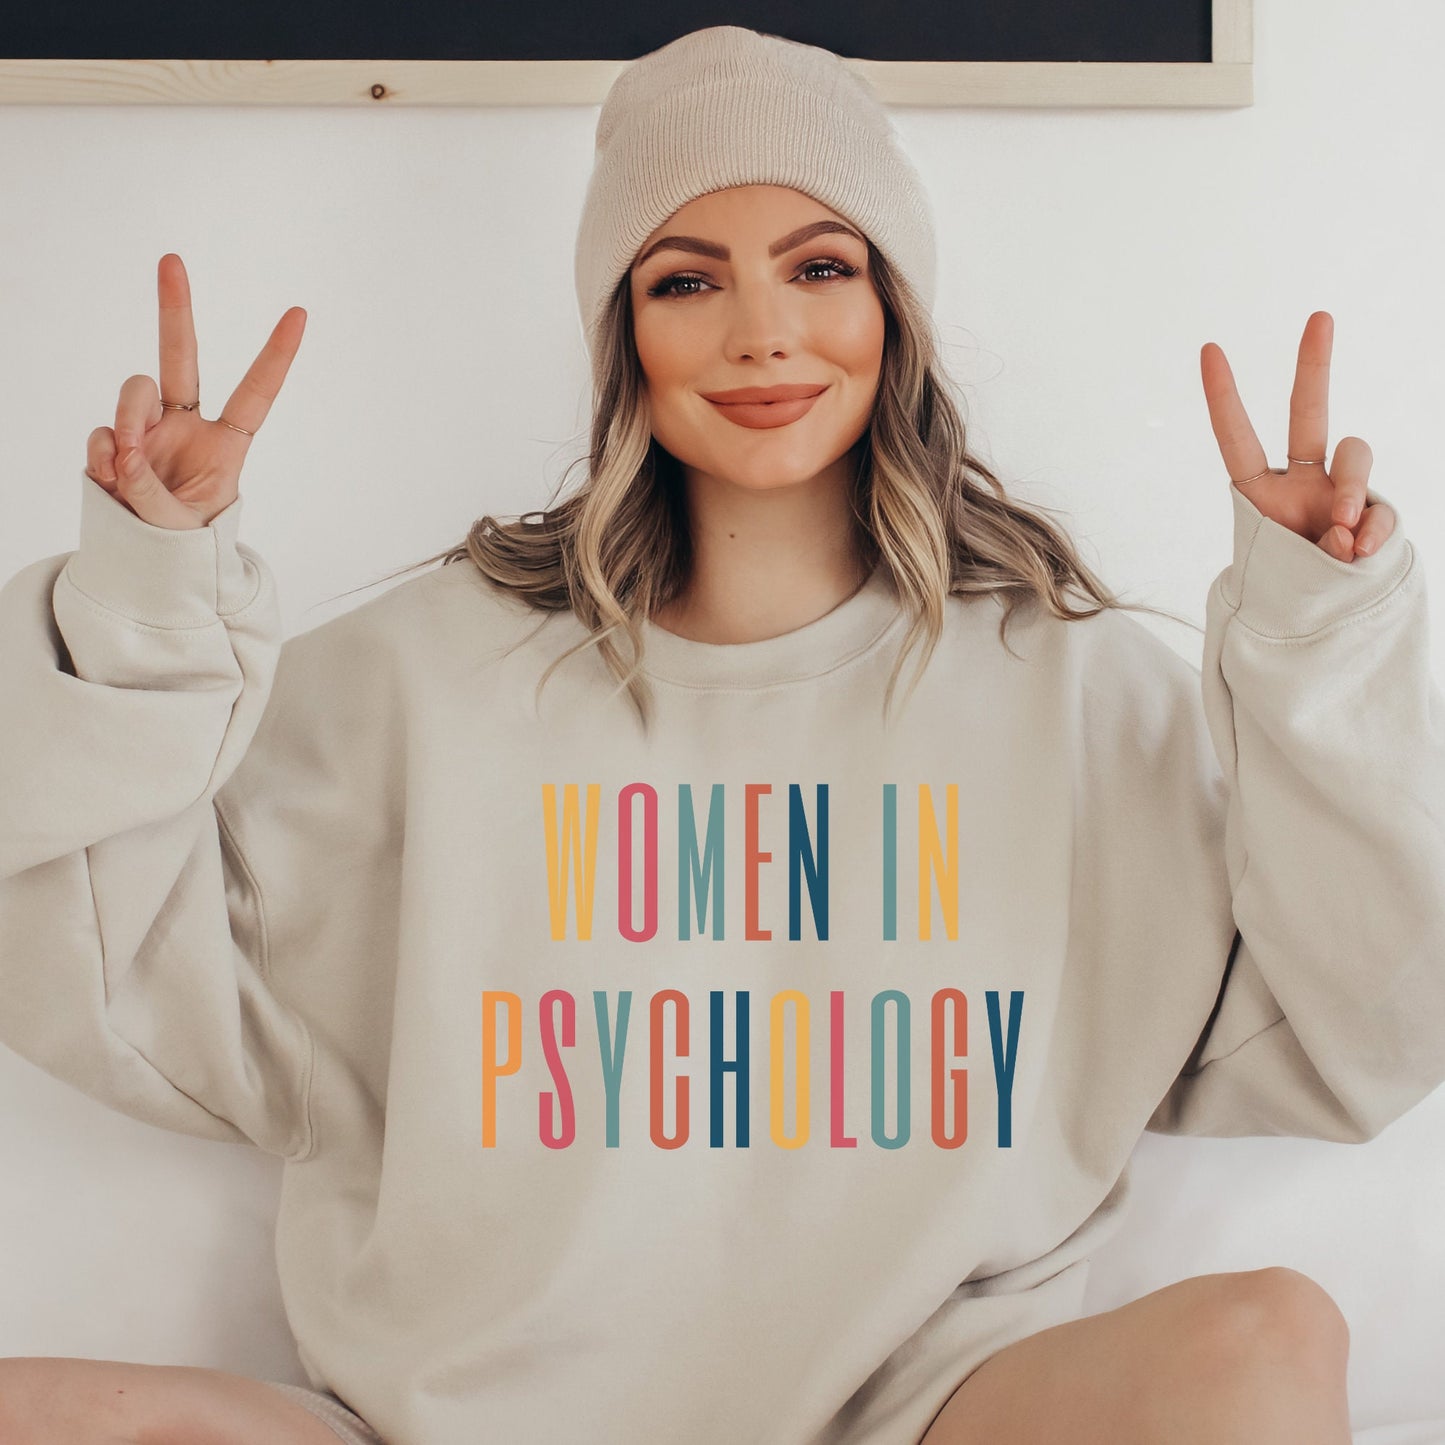 beige unisex psych sweatshirt that says "women in psychology" in all capital, multicolored letters